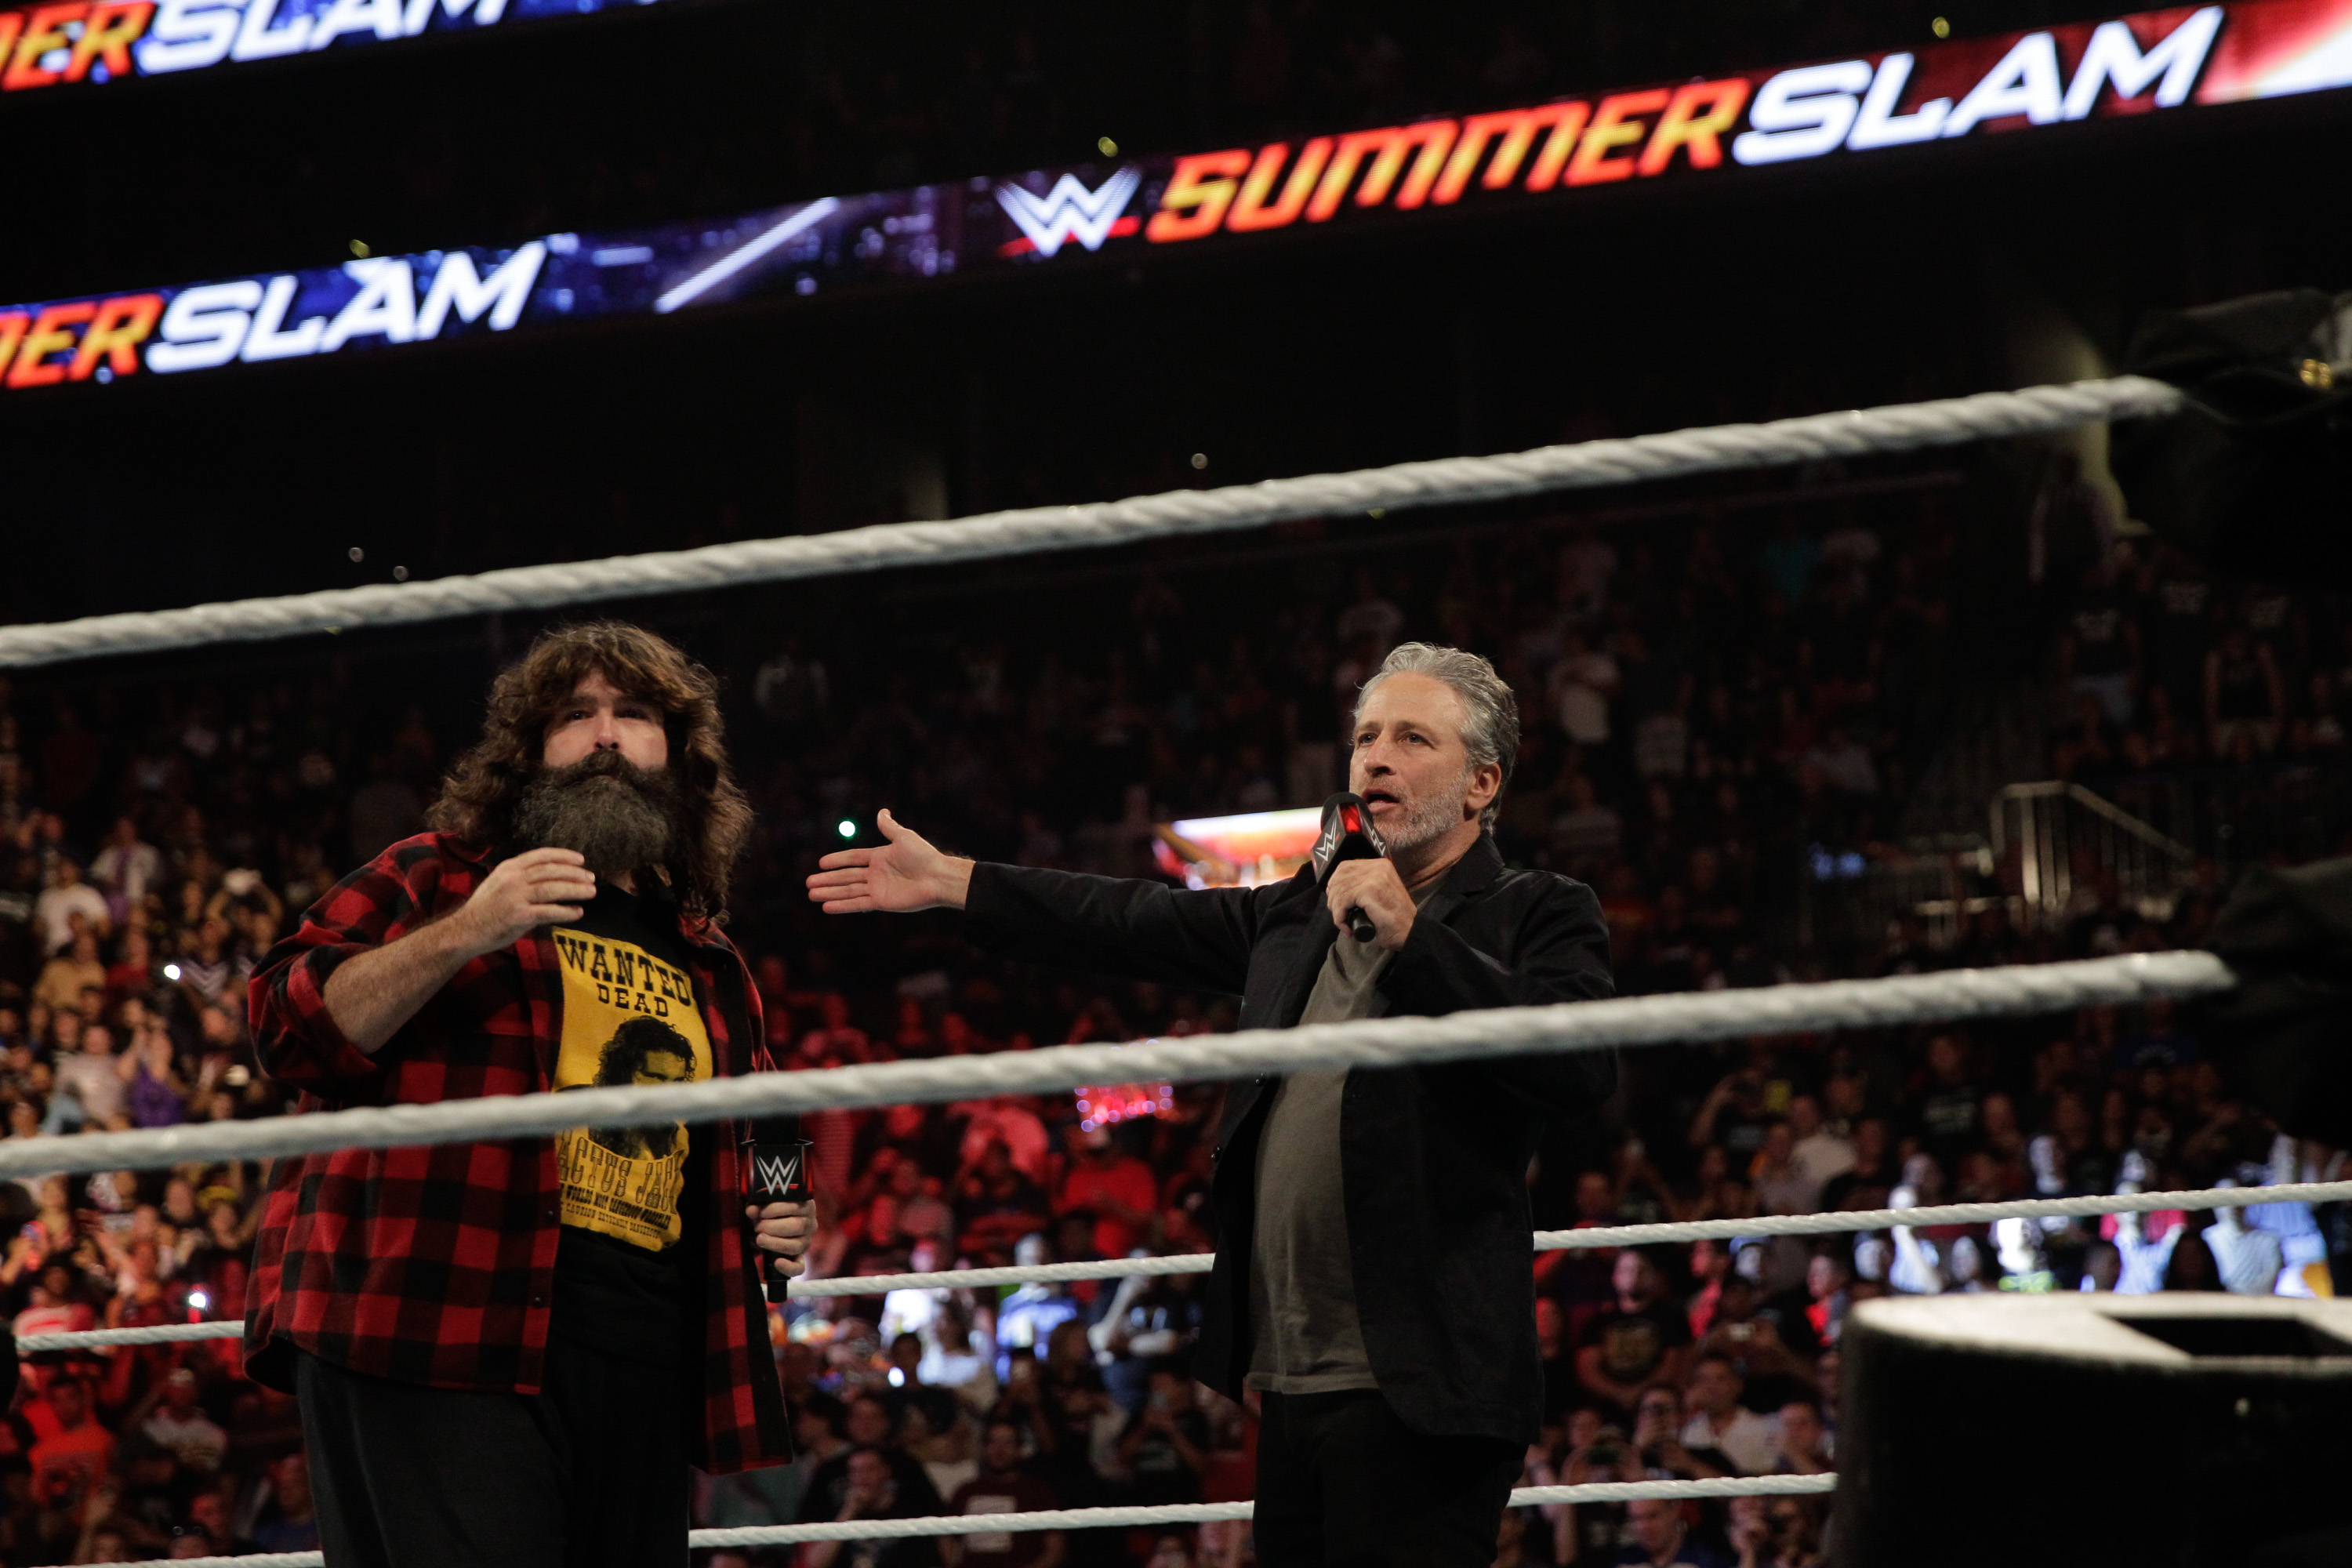 Column: Why WTOP drove 9 hours to WWE SummerSlam